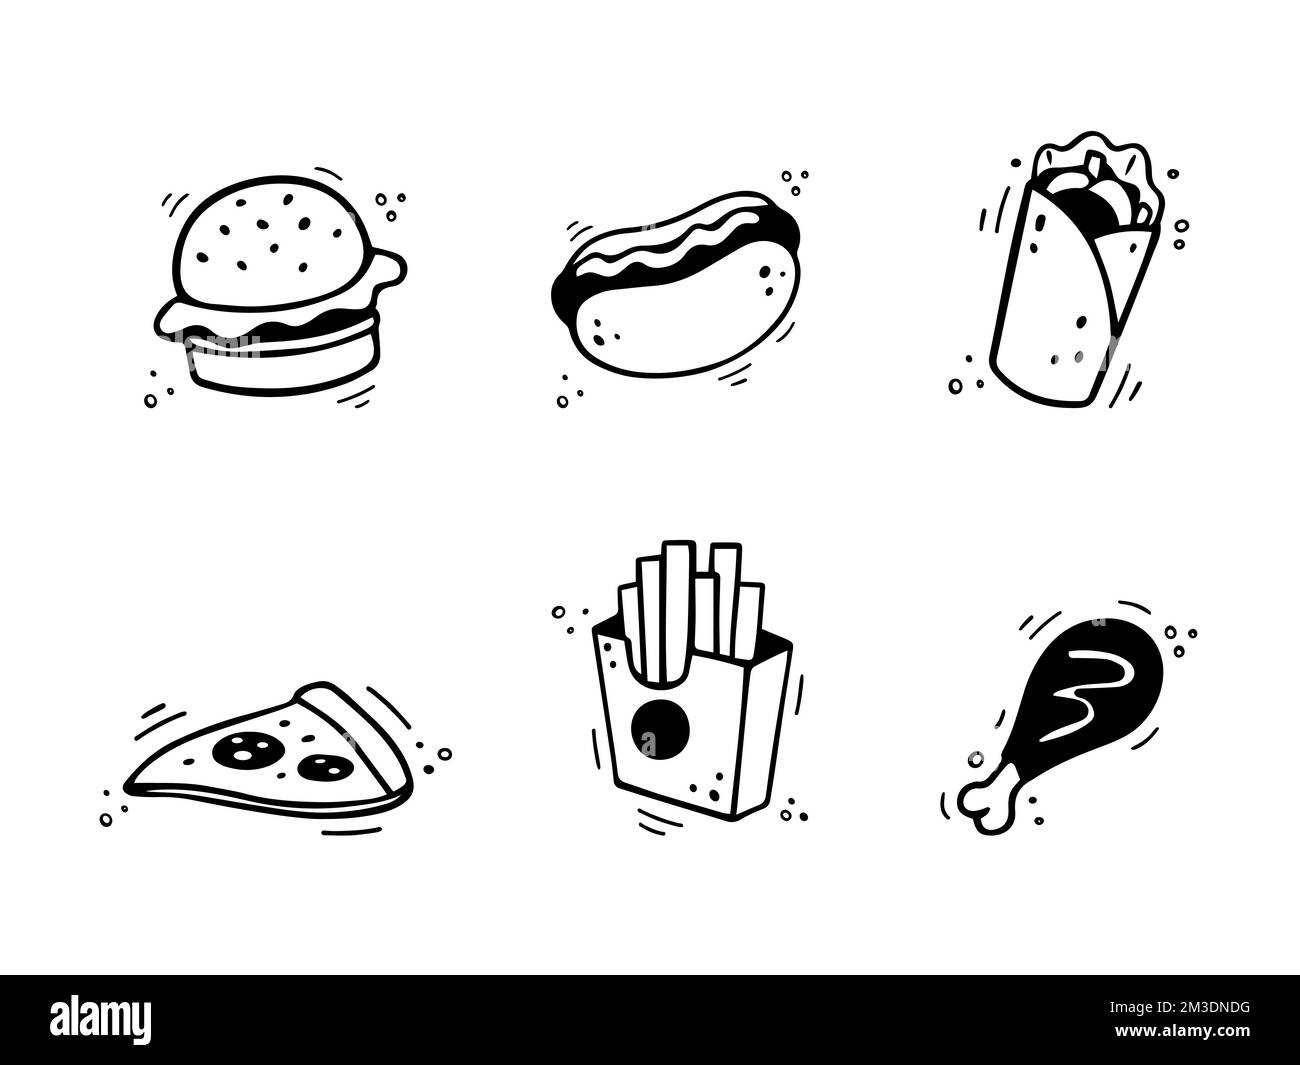 Hand drawn fast food icons. Sketch of snack elements - burger, French fries box, pizza, doner, chicken leg. Fast food illustration in doodle style. Fa Stock Vector